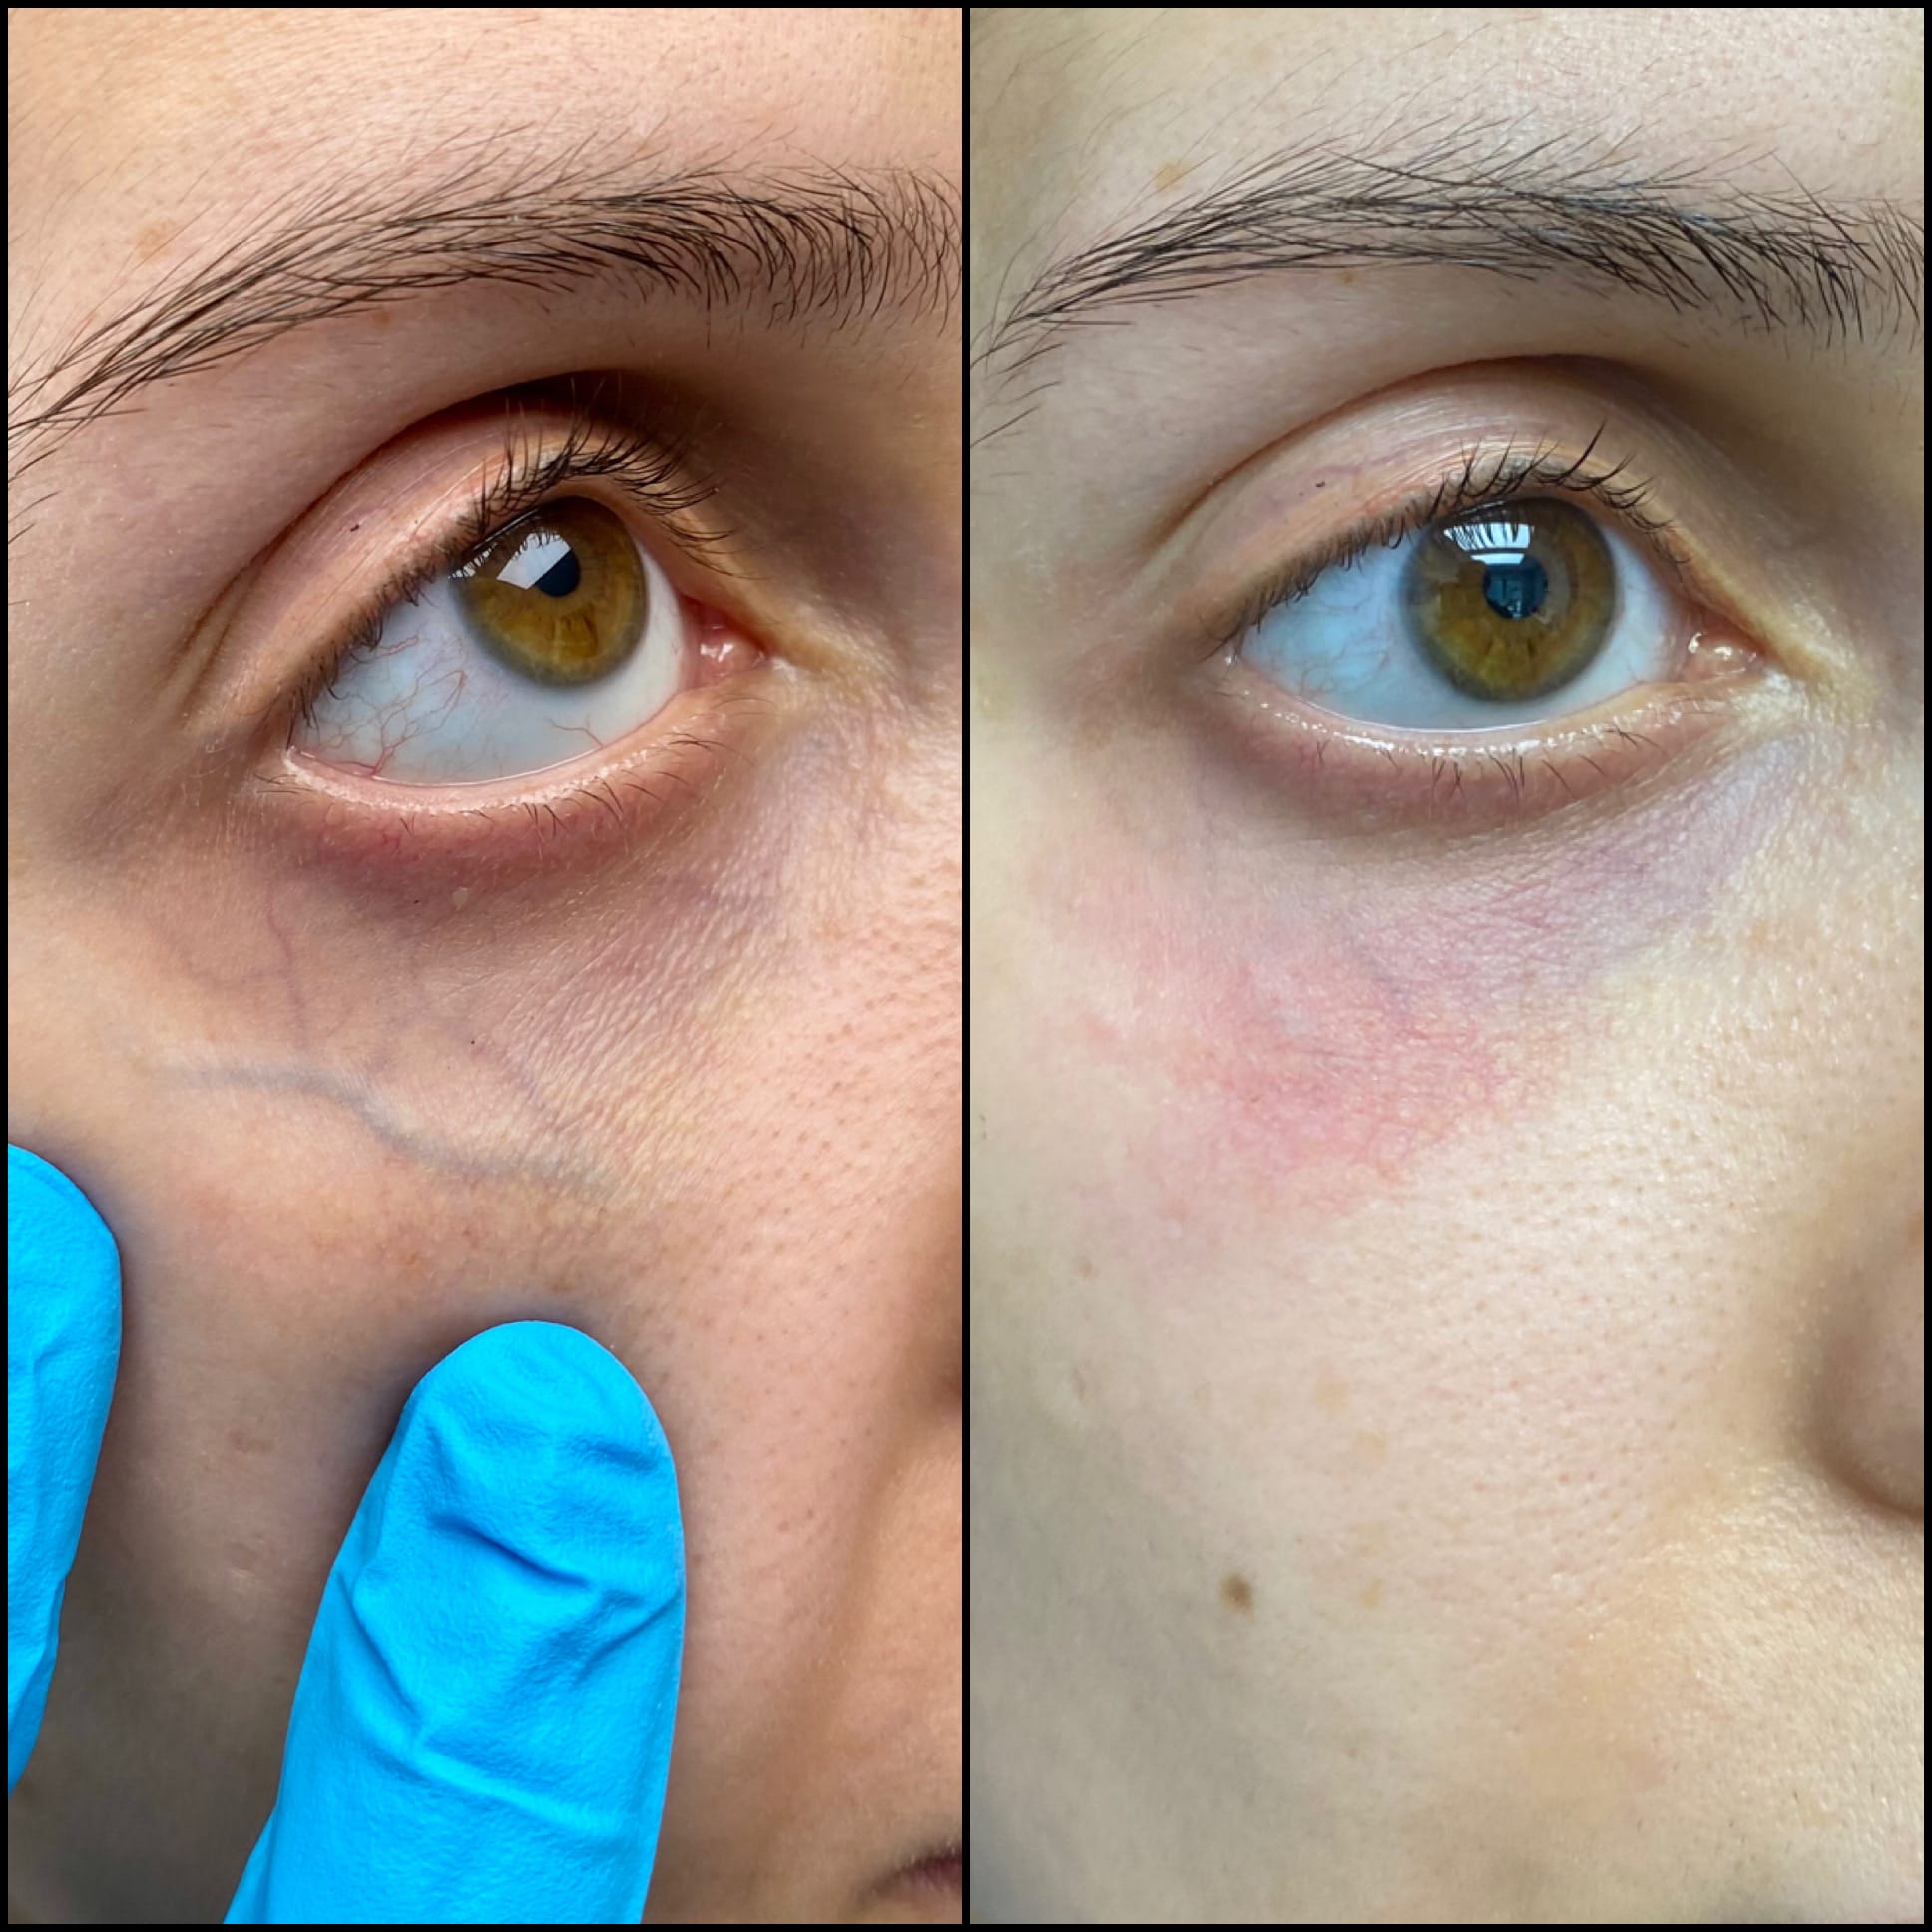 Laser Eyelid Tightening Surgery & Treatment | Dr H Consult